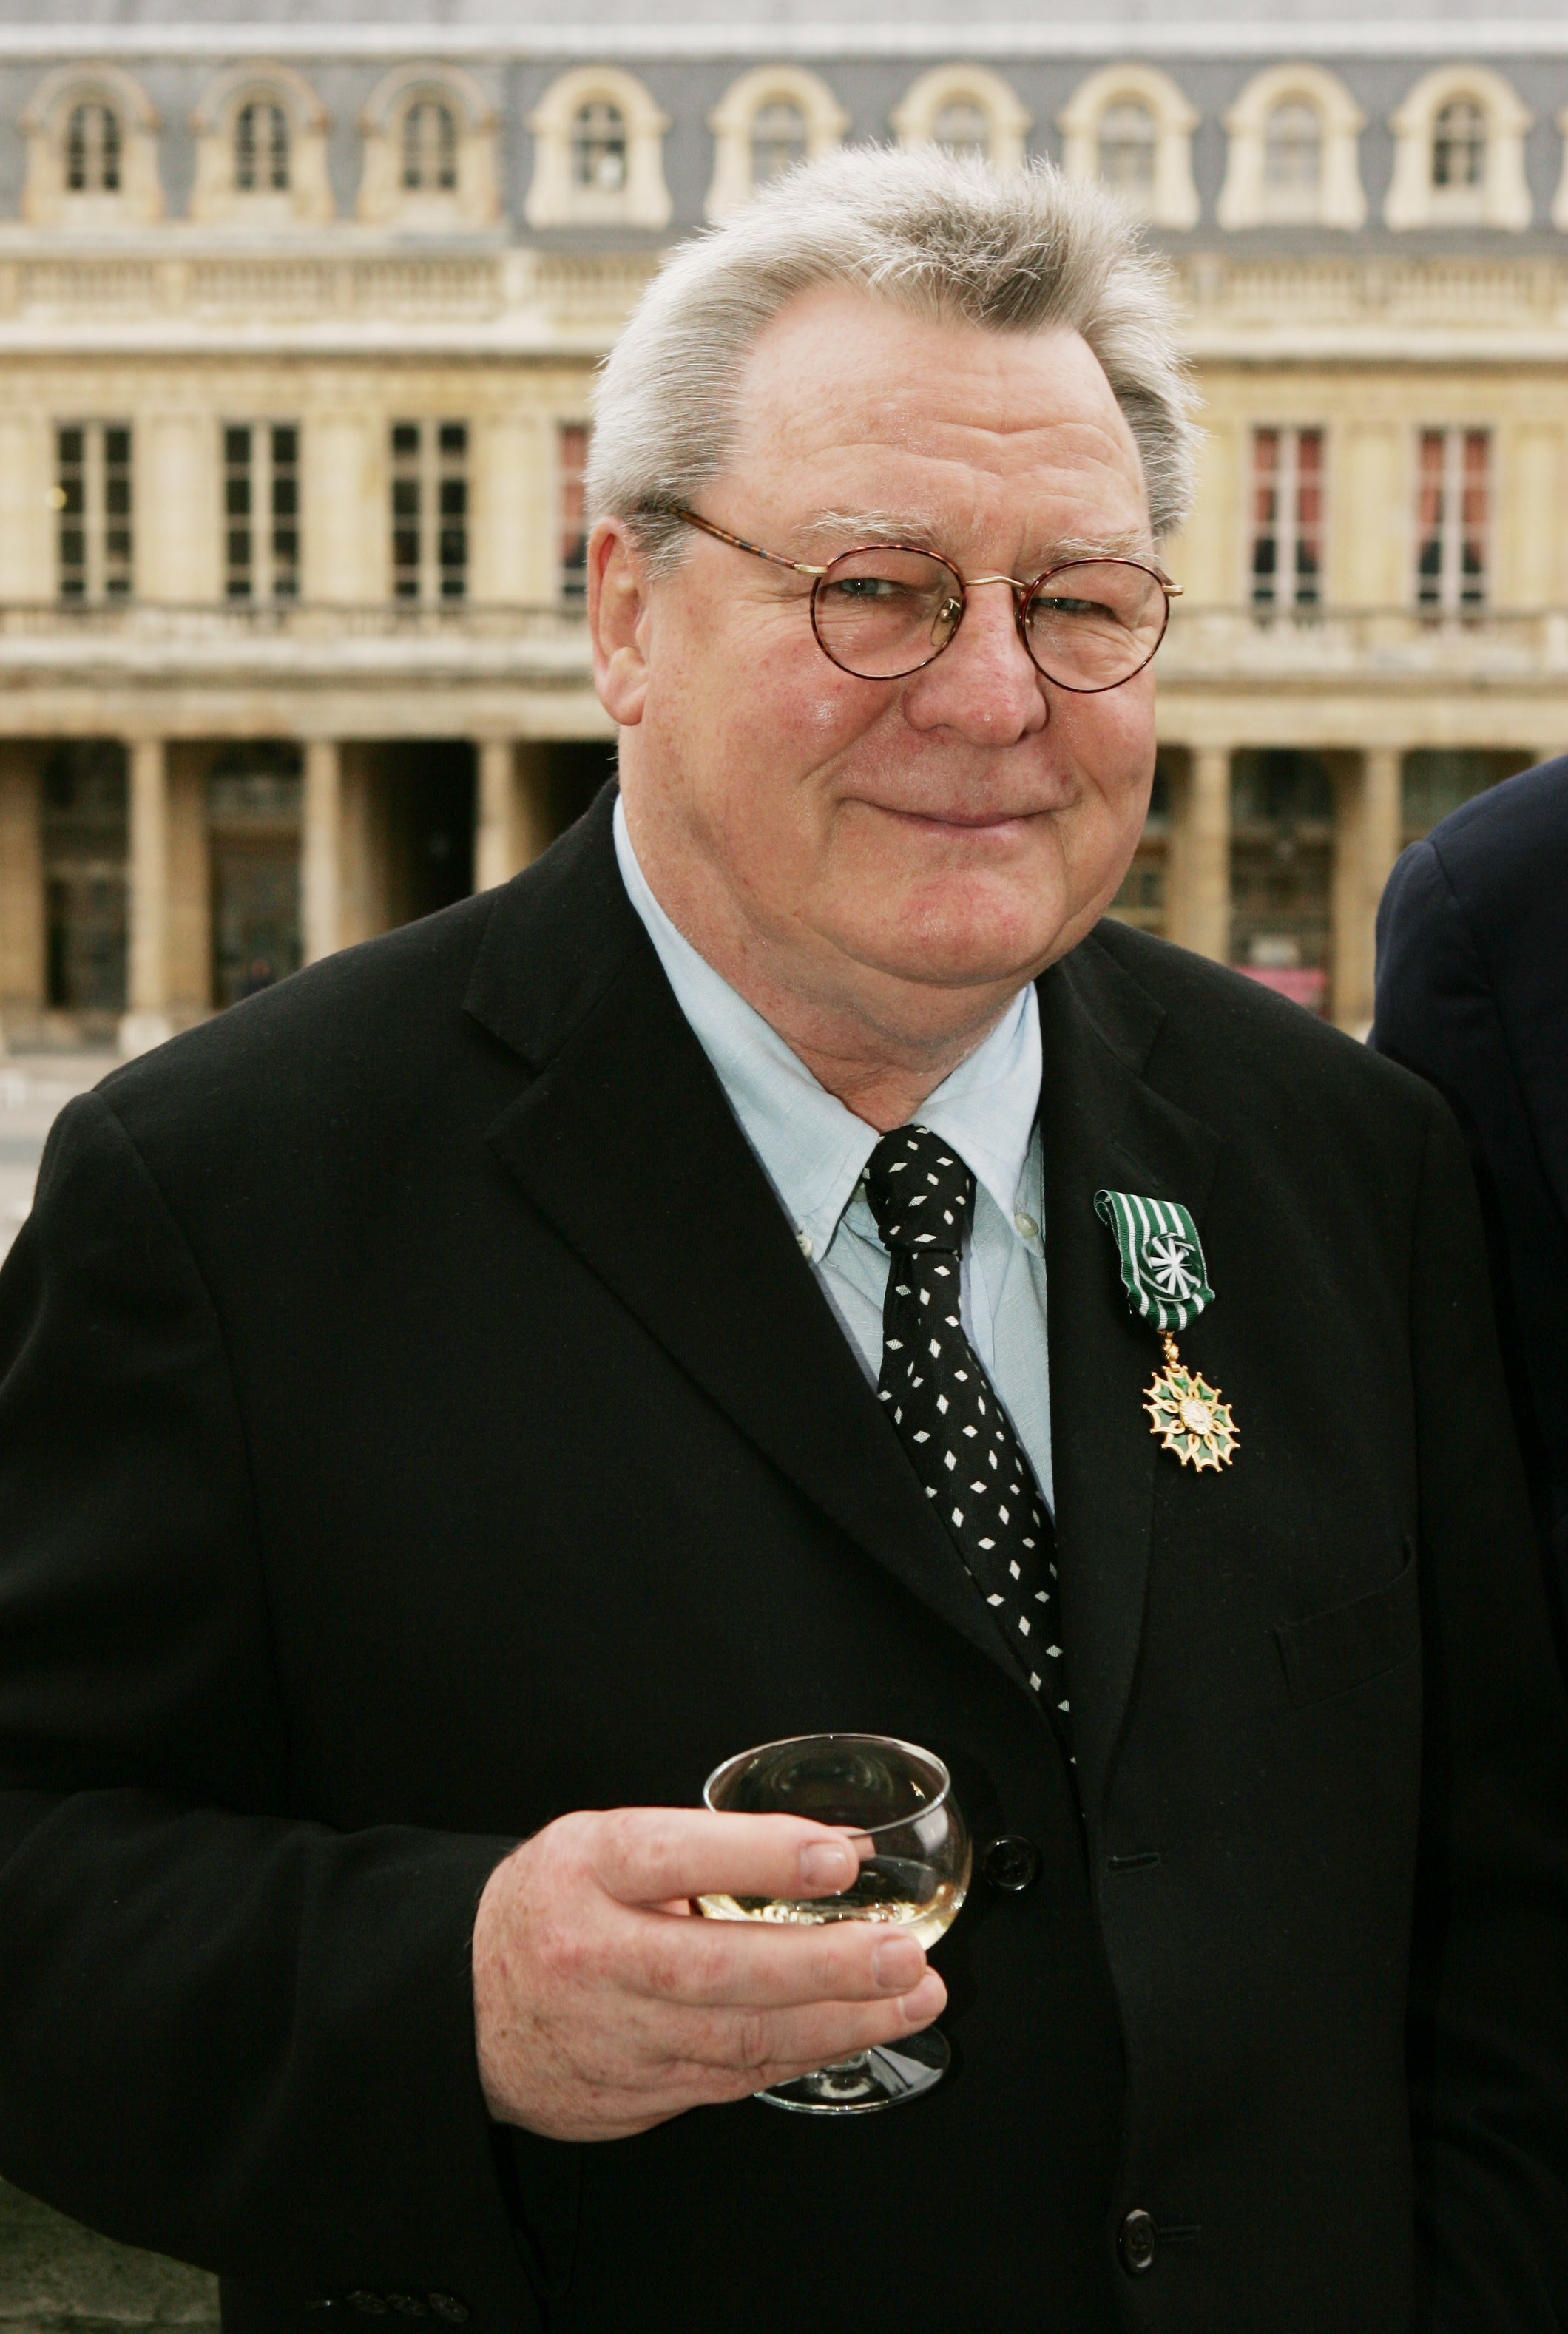 British film director Sir Alan Parker displays his &quot;Officier des Arts et Lettres&quot; medal awarded to him for his contribution to cinema